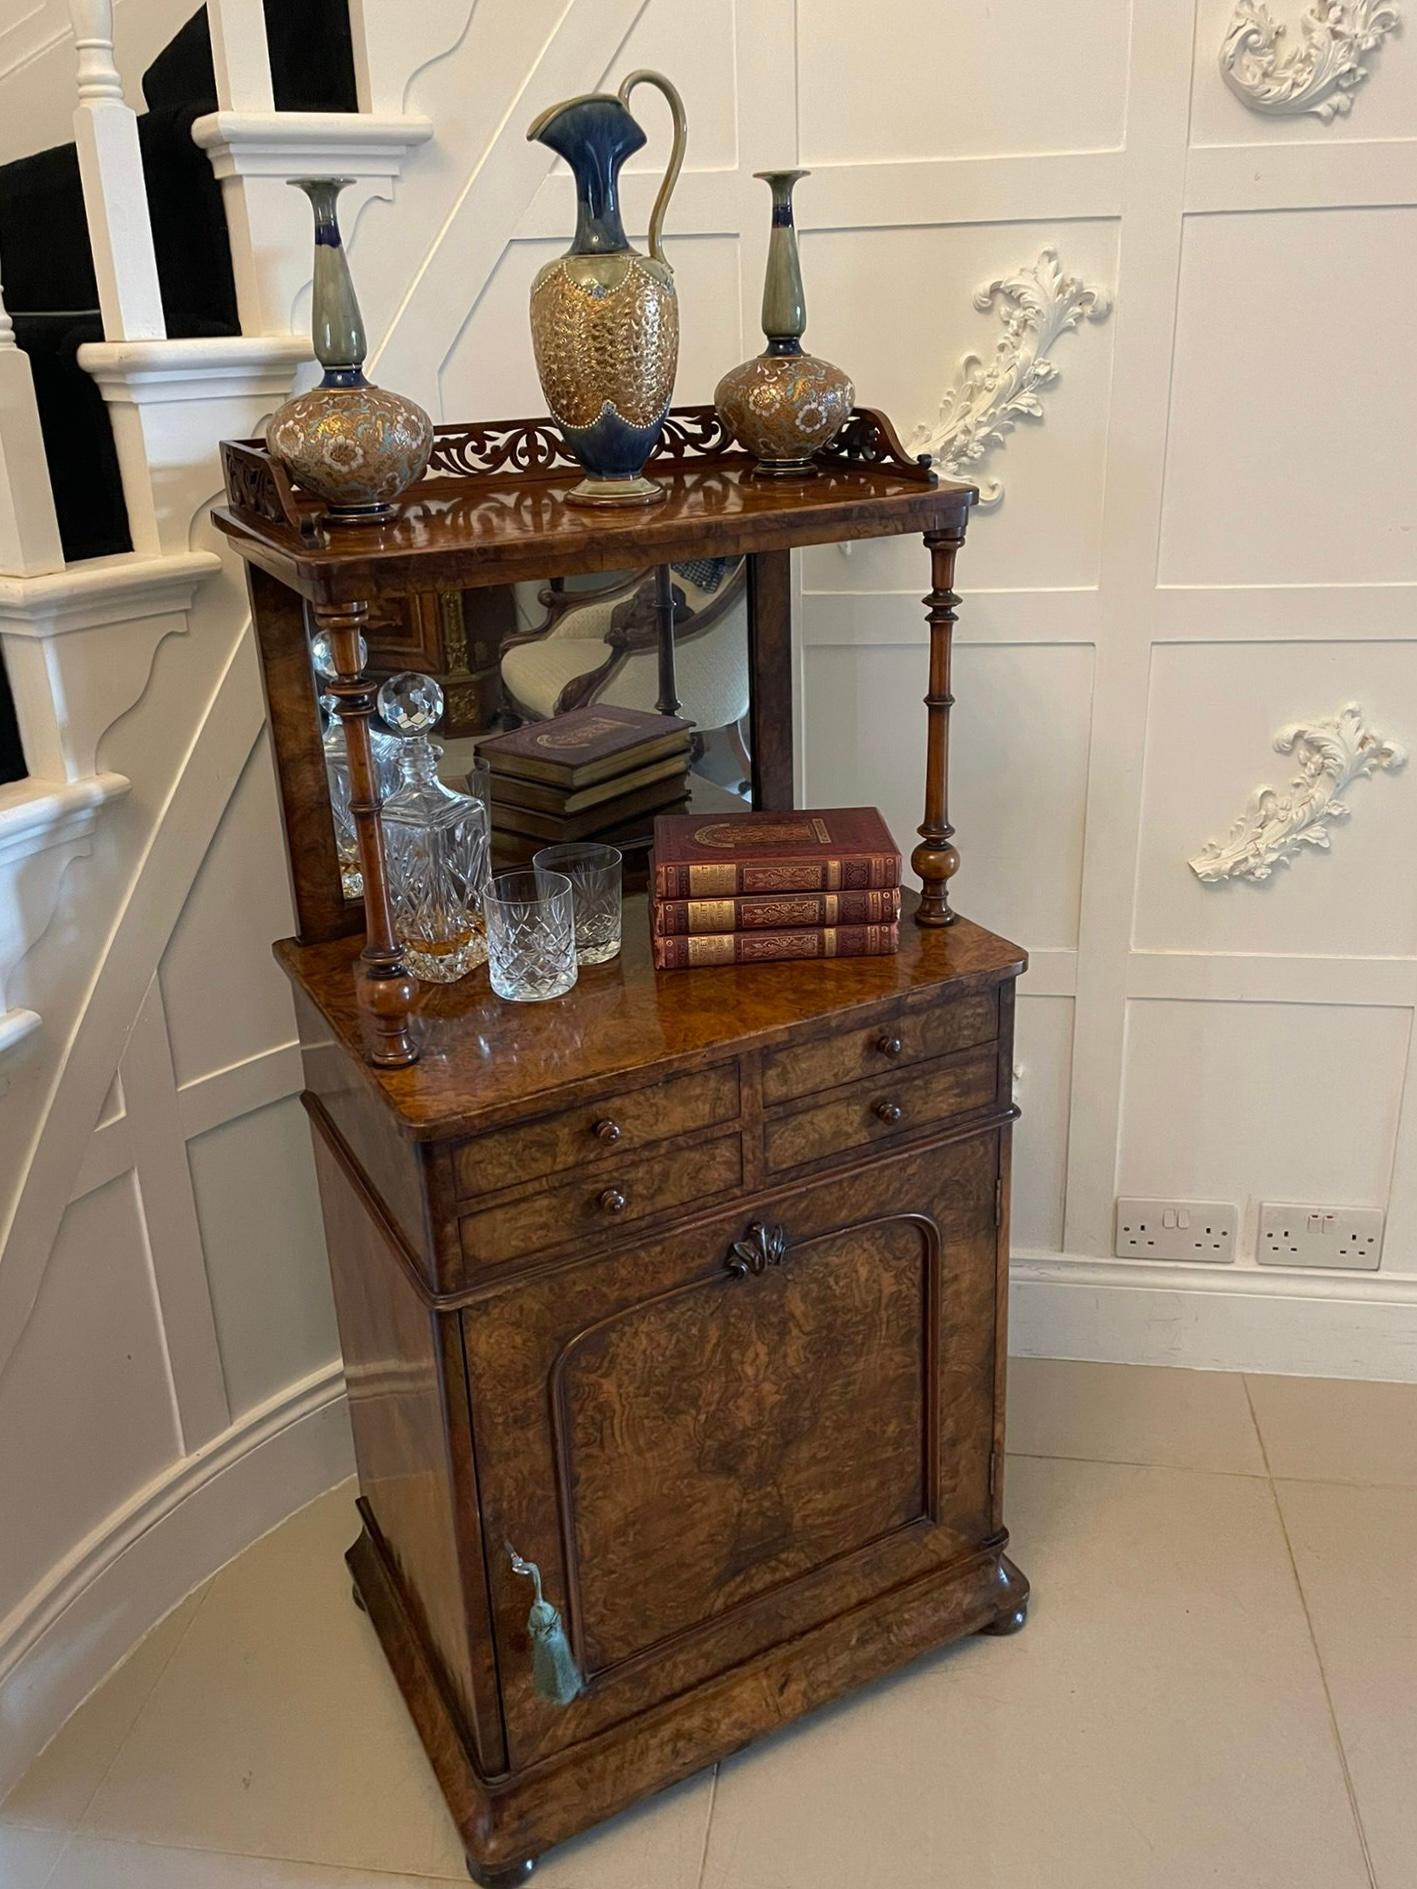 Unusual Antique Victorian quality burr walnut side cabinet having a carved walnut gallery above a burr walnut top supported by a mirror back and a pair of turned walnut columns, four small drawers with original turned walnut knobs above a single